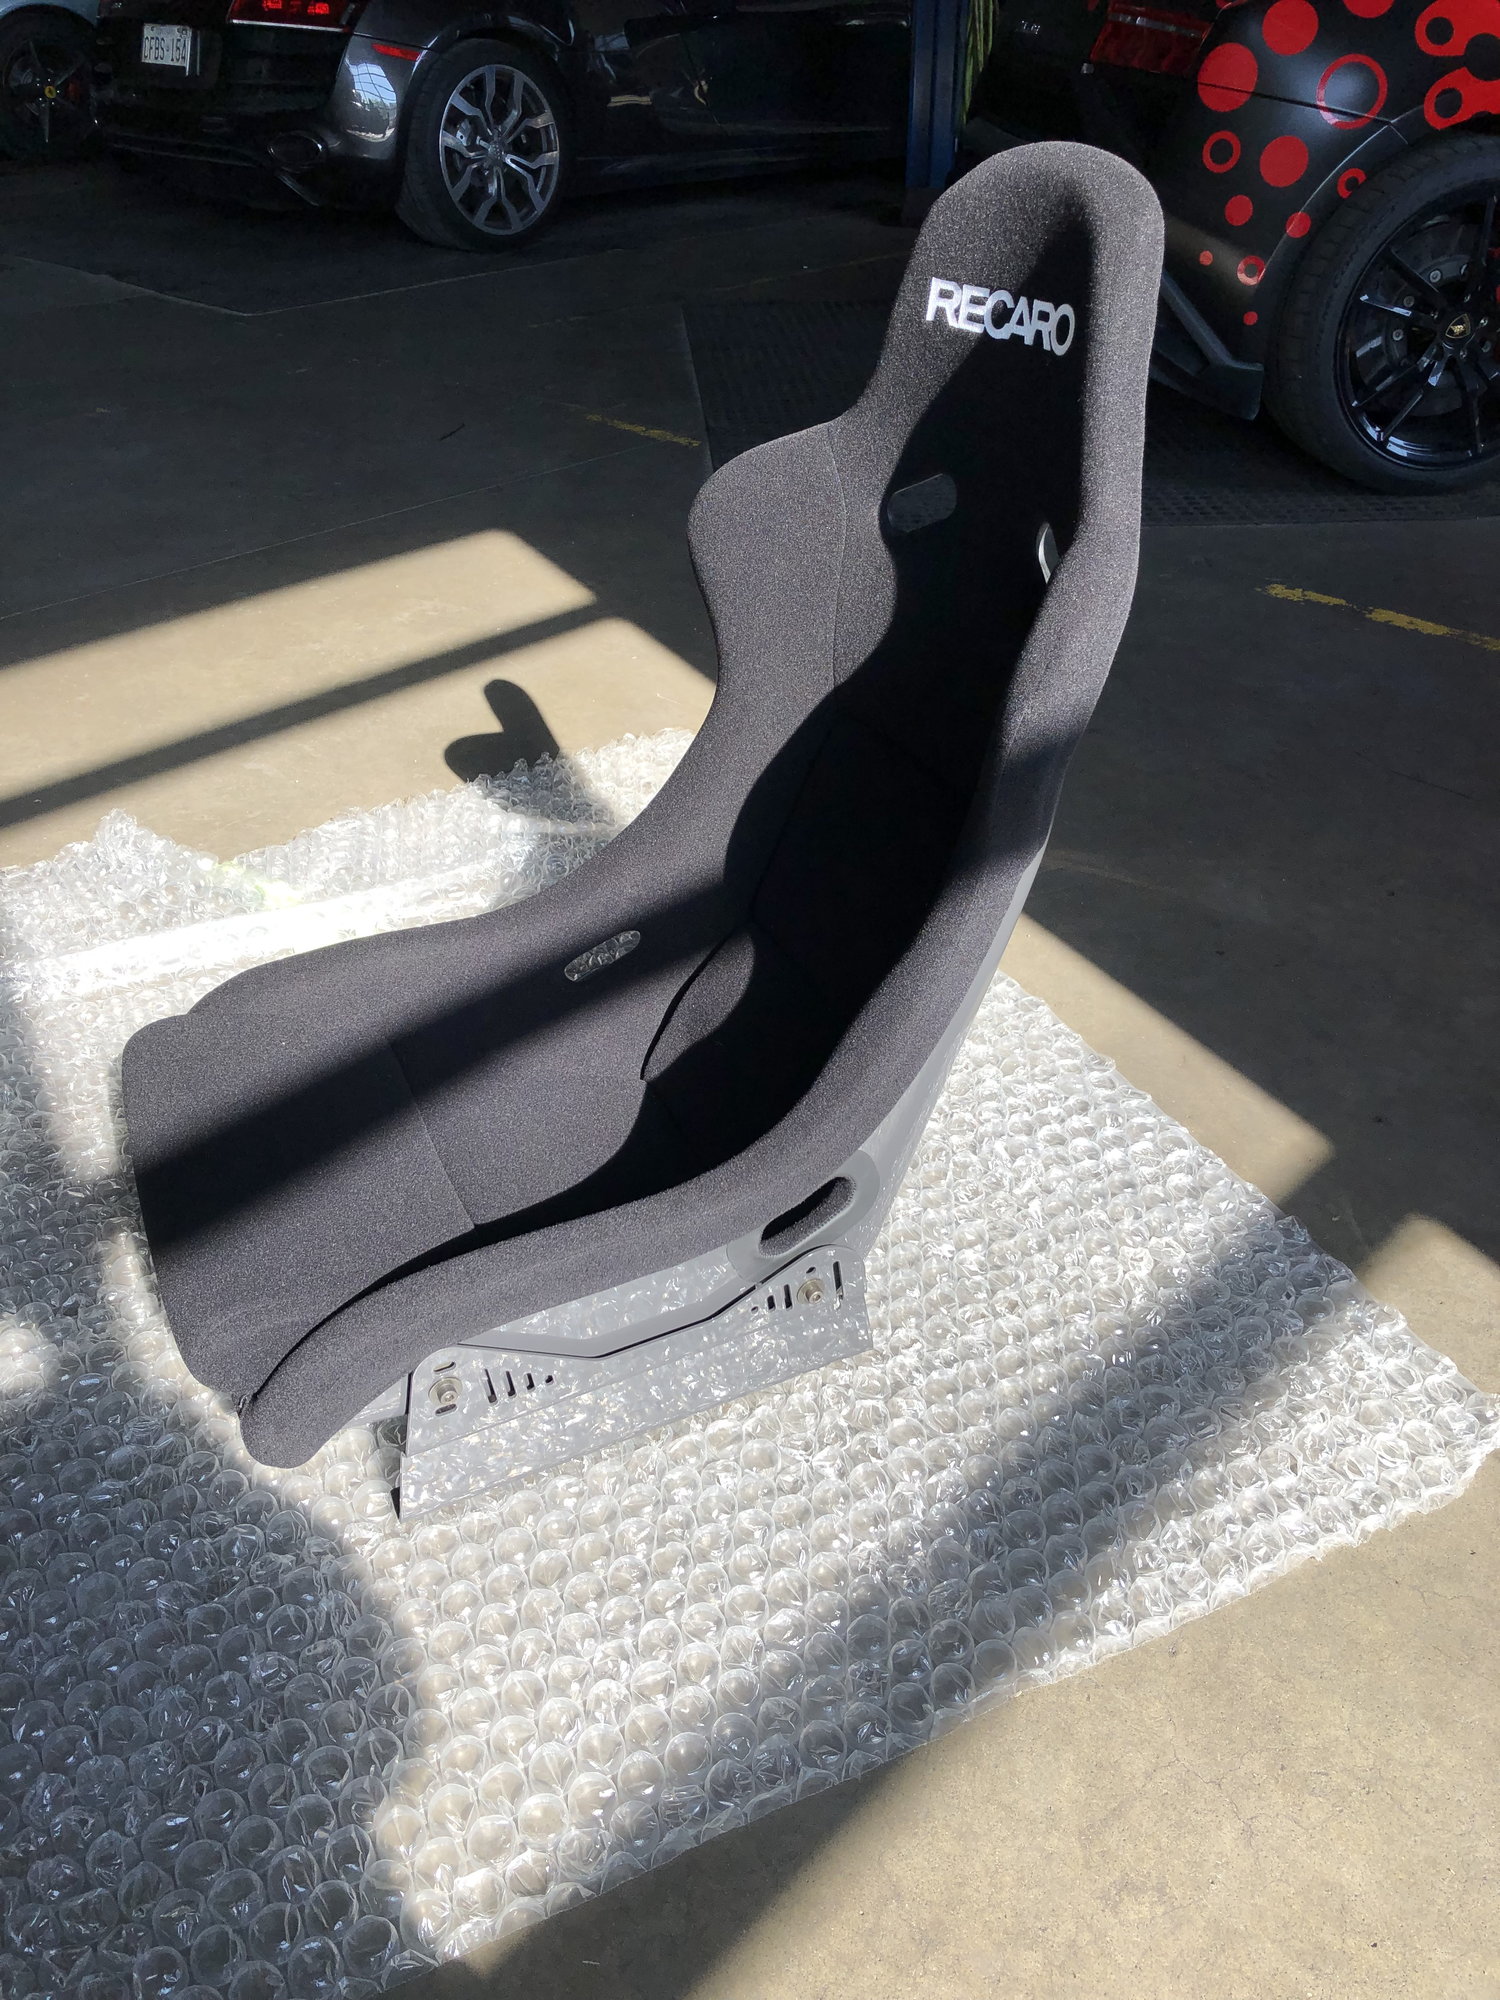 Interior/Upholstery - BN Recaro Pole Position NG seats for sale with painted grey/black backs color 7A1 - New - 2006 to 2011 Porsche 911 - Toronto, ON L6A 0P, Canada